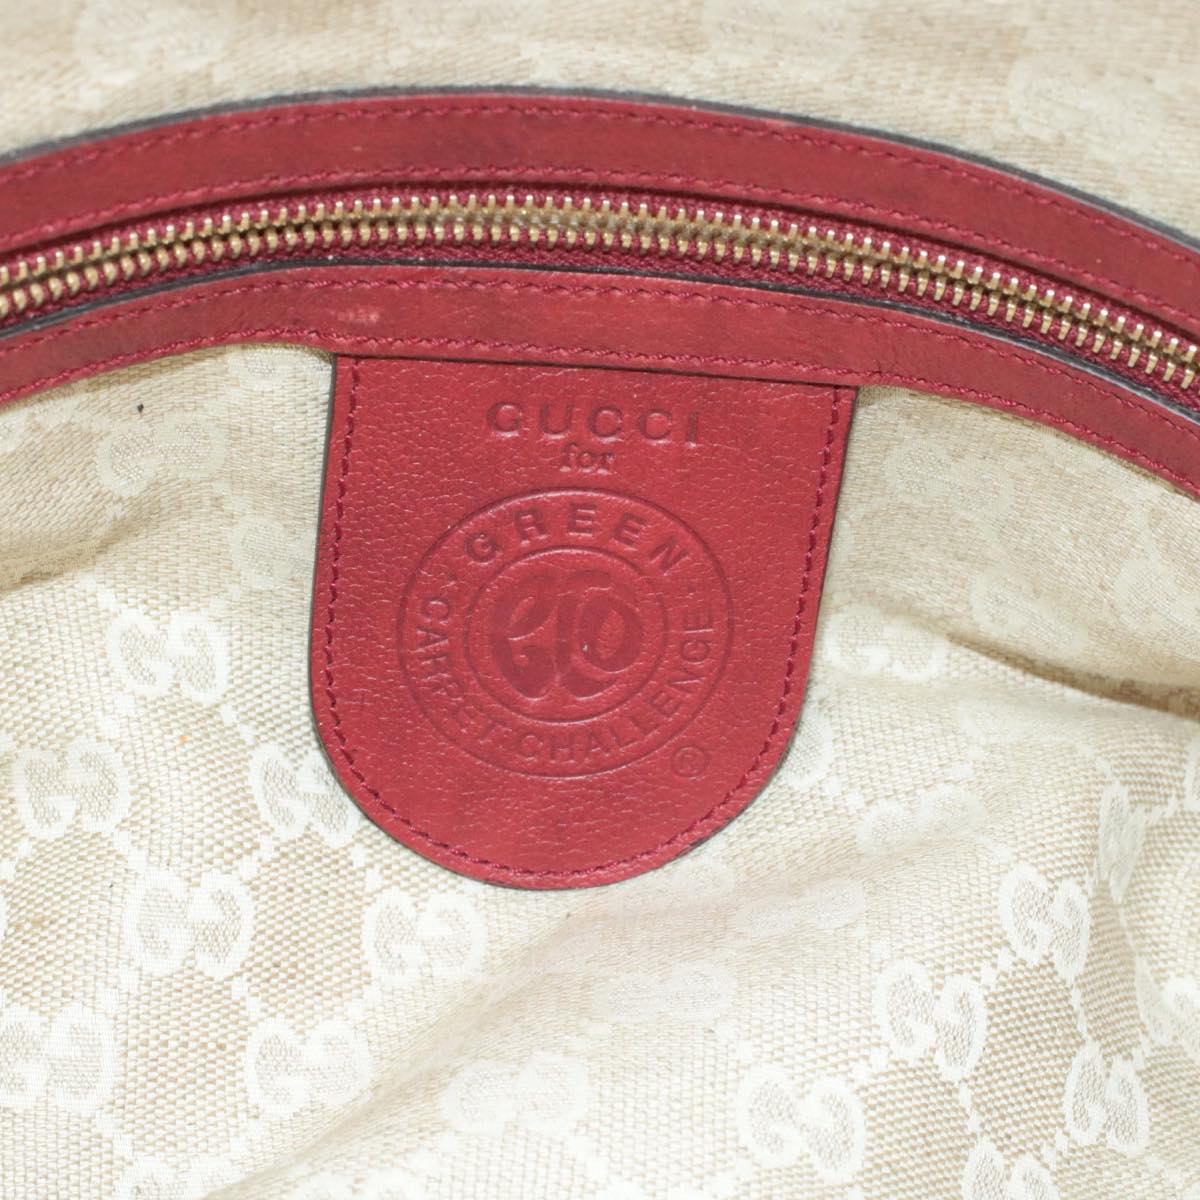 GUCCI Green Carpet Challenge Fringe Bamboo Tote Bag Leather 2way Red Auth rd707